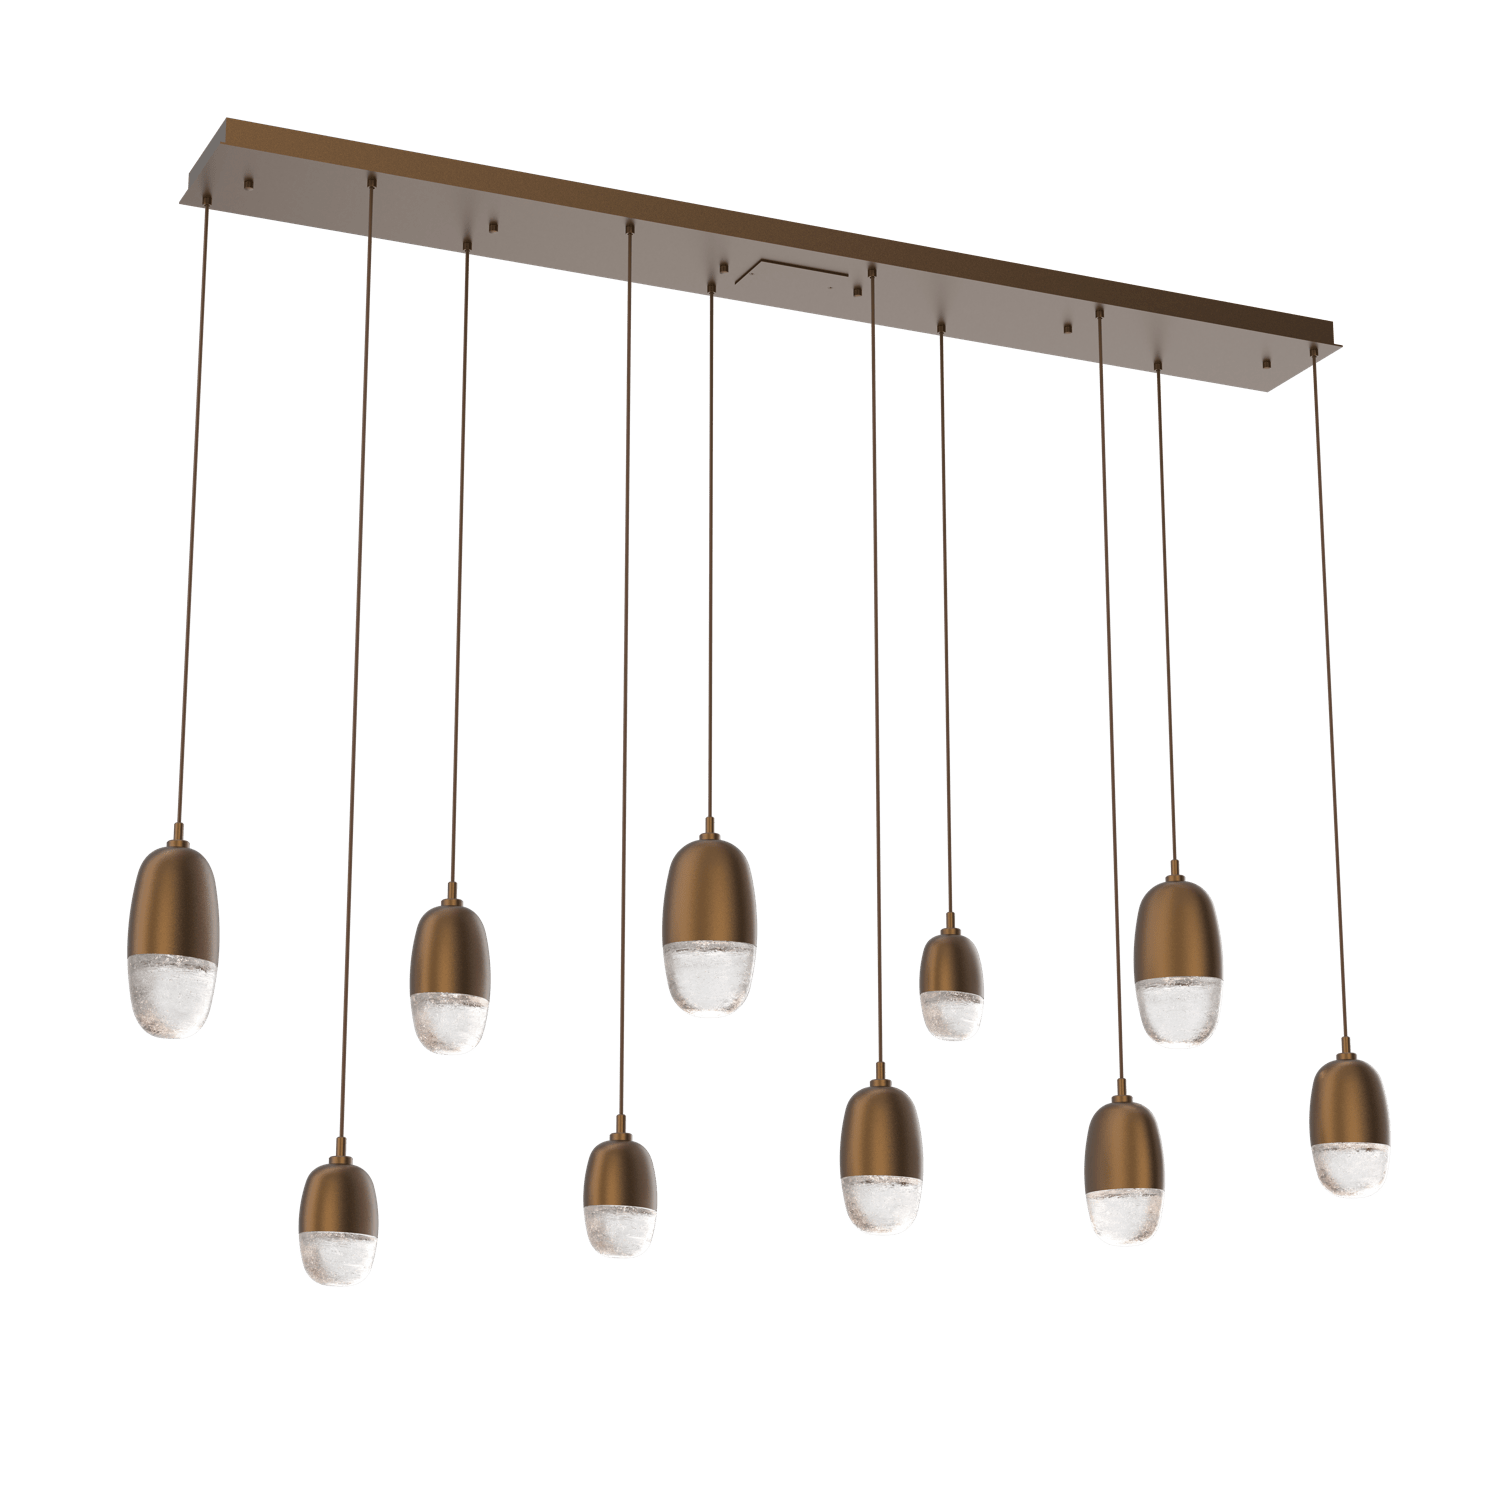 PLB0079-09-FB-Hammerton-Studio-Pebble-9-light-linear-pendant-chandelier-with-flat-bronze-finish-and-clear-cast-glass-shades-and-LED-lamping